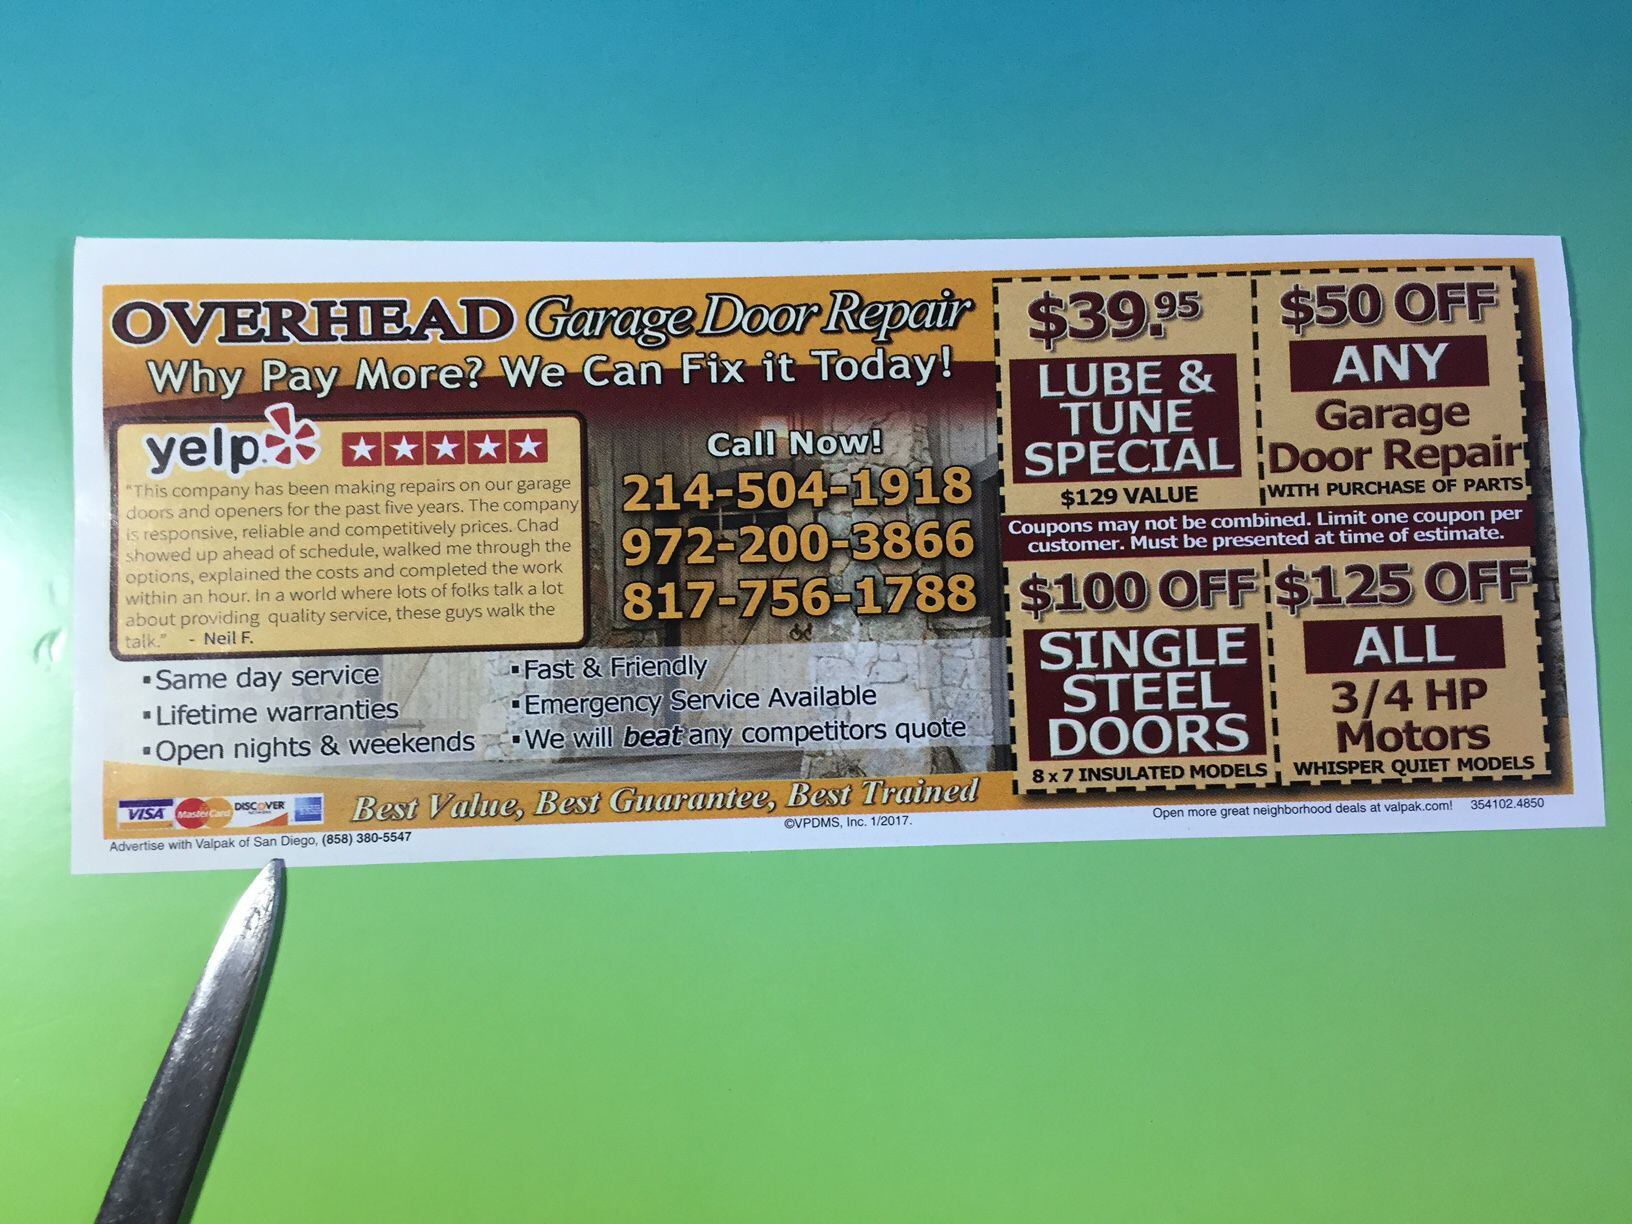 The pointer shows a clue that this is the wrong company to call. While other coupons in...